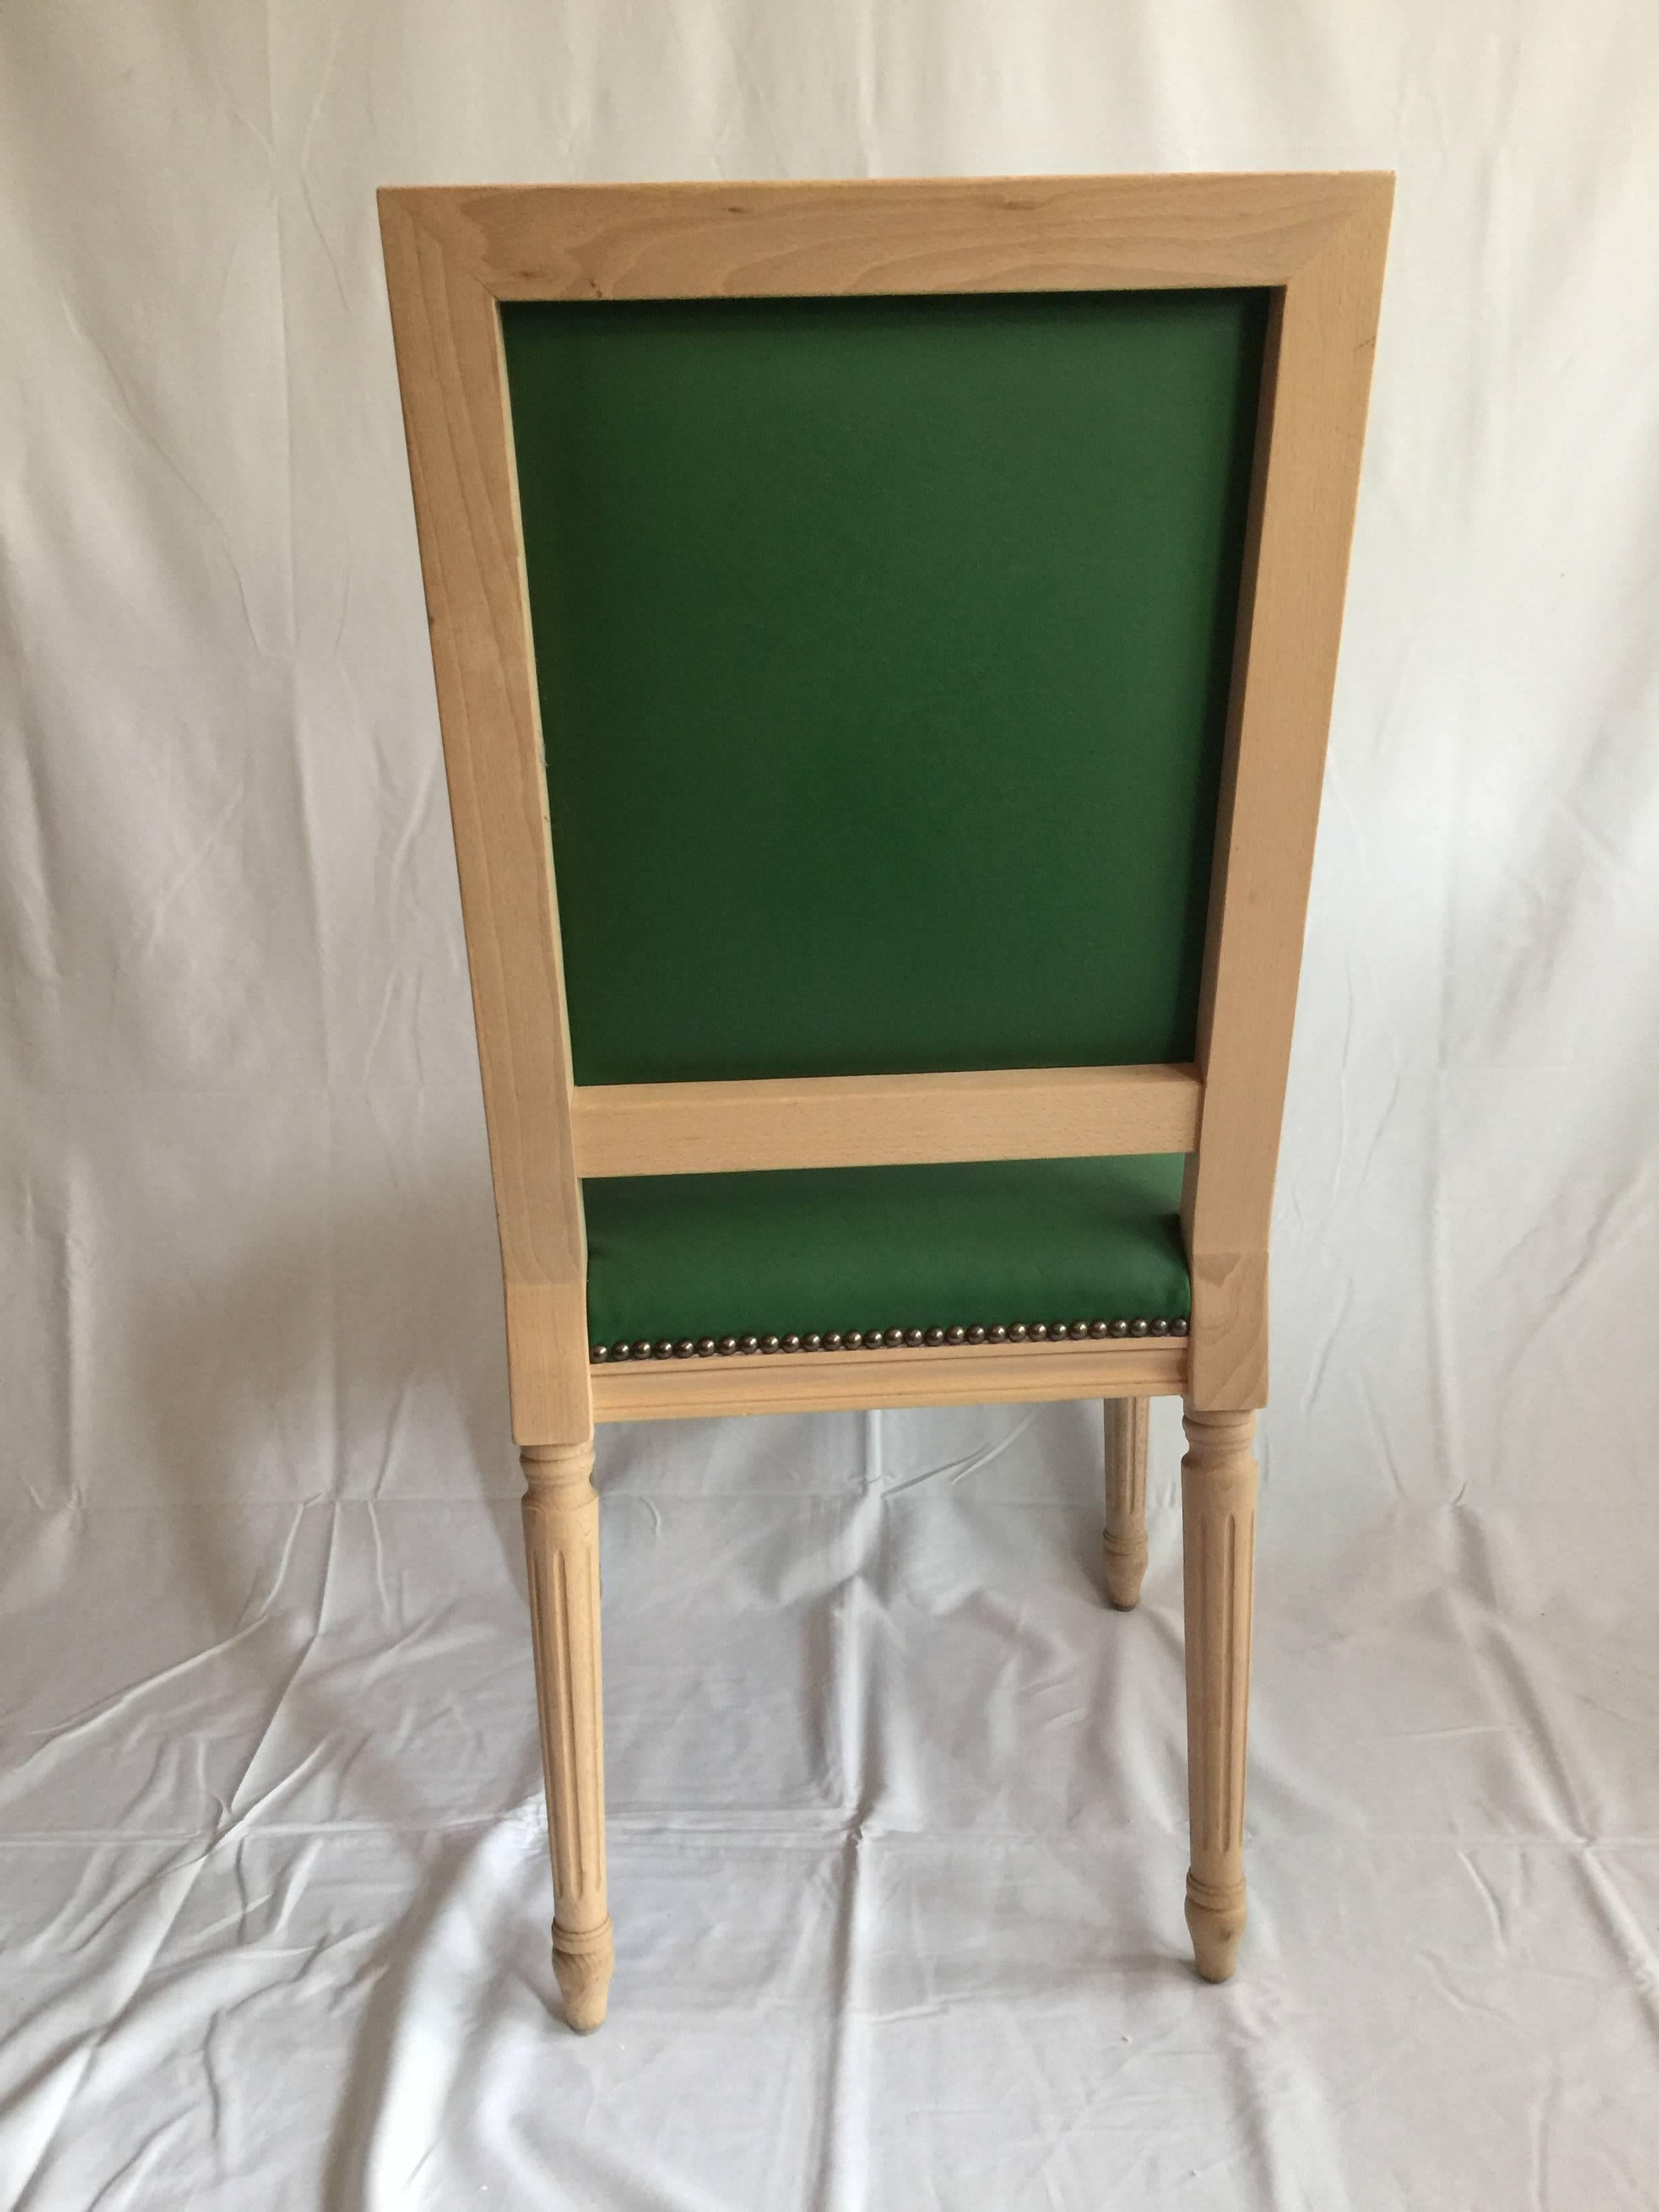 Square back Louis XVI style dining or side chair. Natural wood finish, custom colored Kelly green leather upholstery, antiqued brass nailhead detailing. Elegant carved details. 

Custom chairs with COM/COL and finish options available. Please